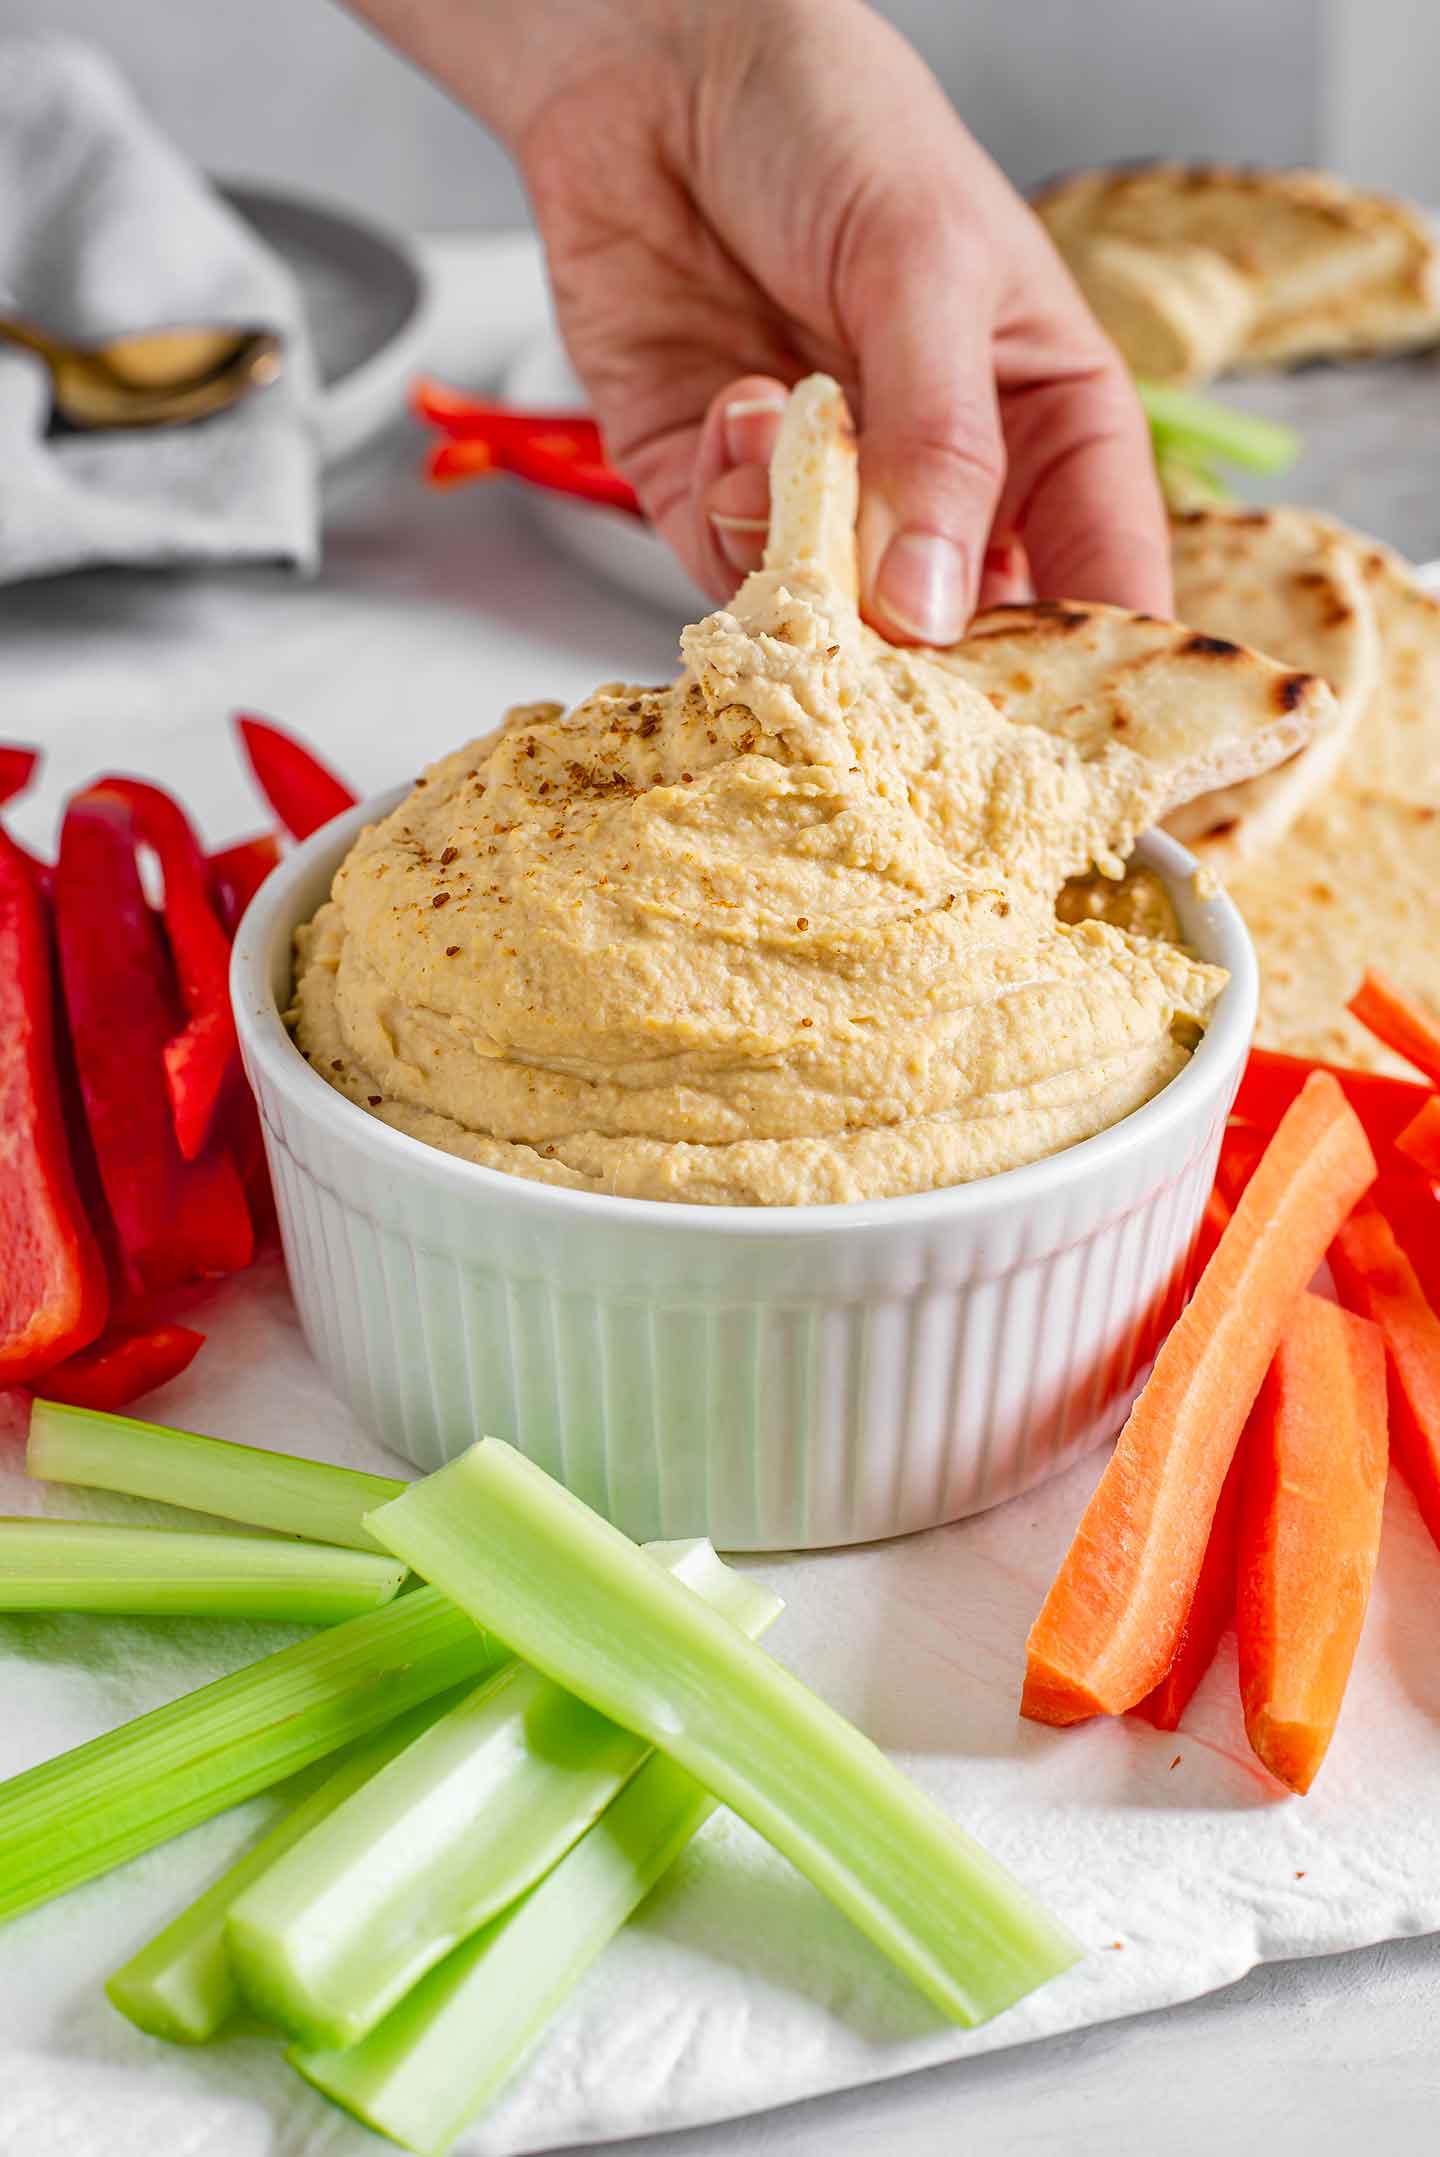 Side view of a hand scooping creamy hummus with a slice of naan bread. Vegetables and naan surround the hummus and other plates of veggies and dip fill the background.